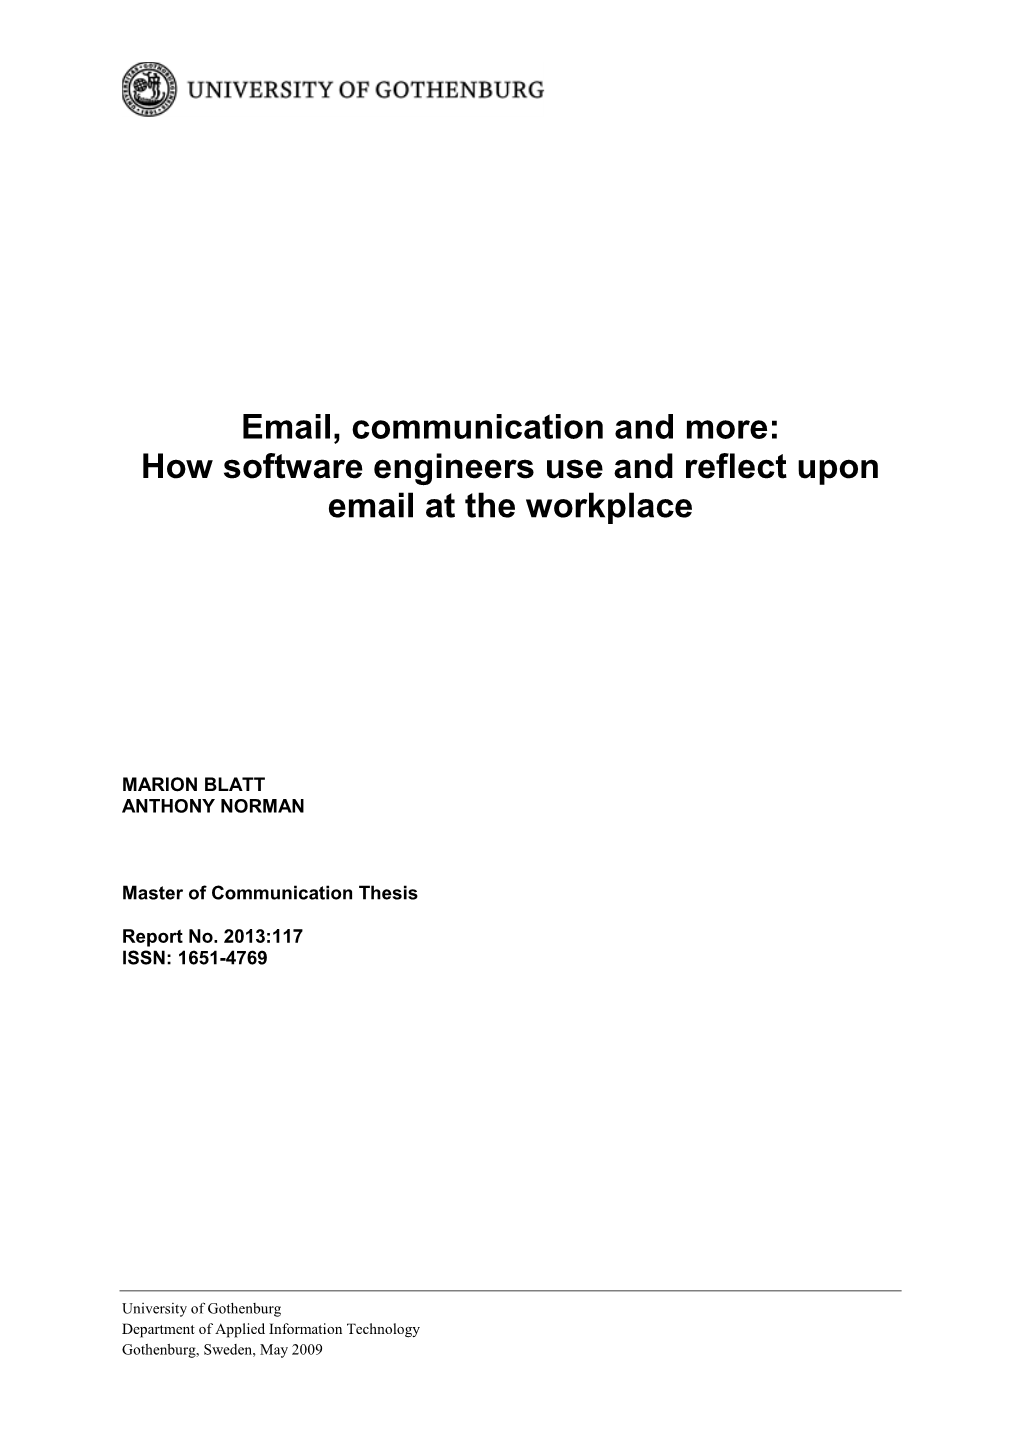 Email, Communication and More: How Software Engineers Use and Reflect Upon Email at the Workplace